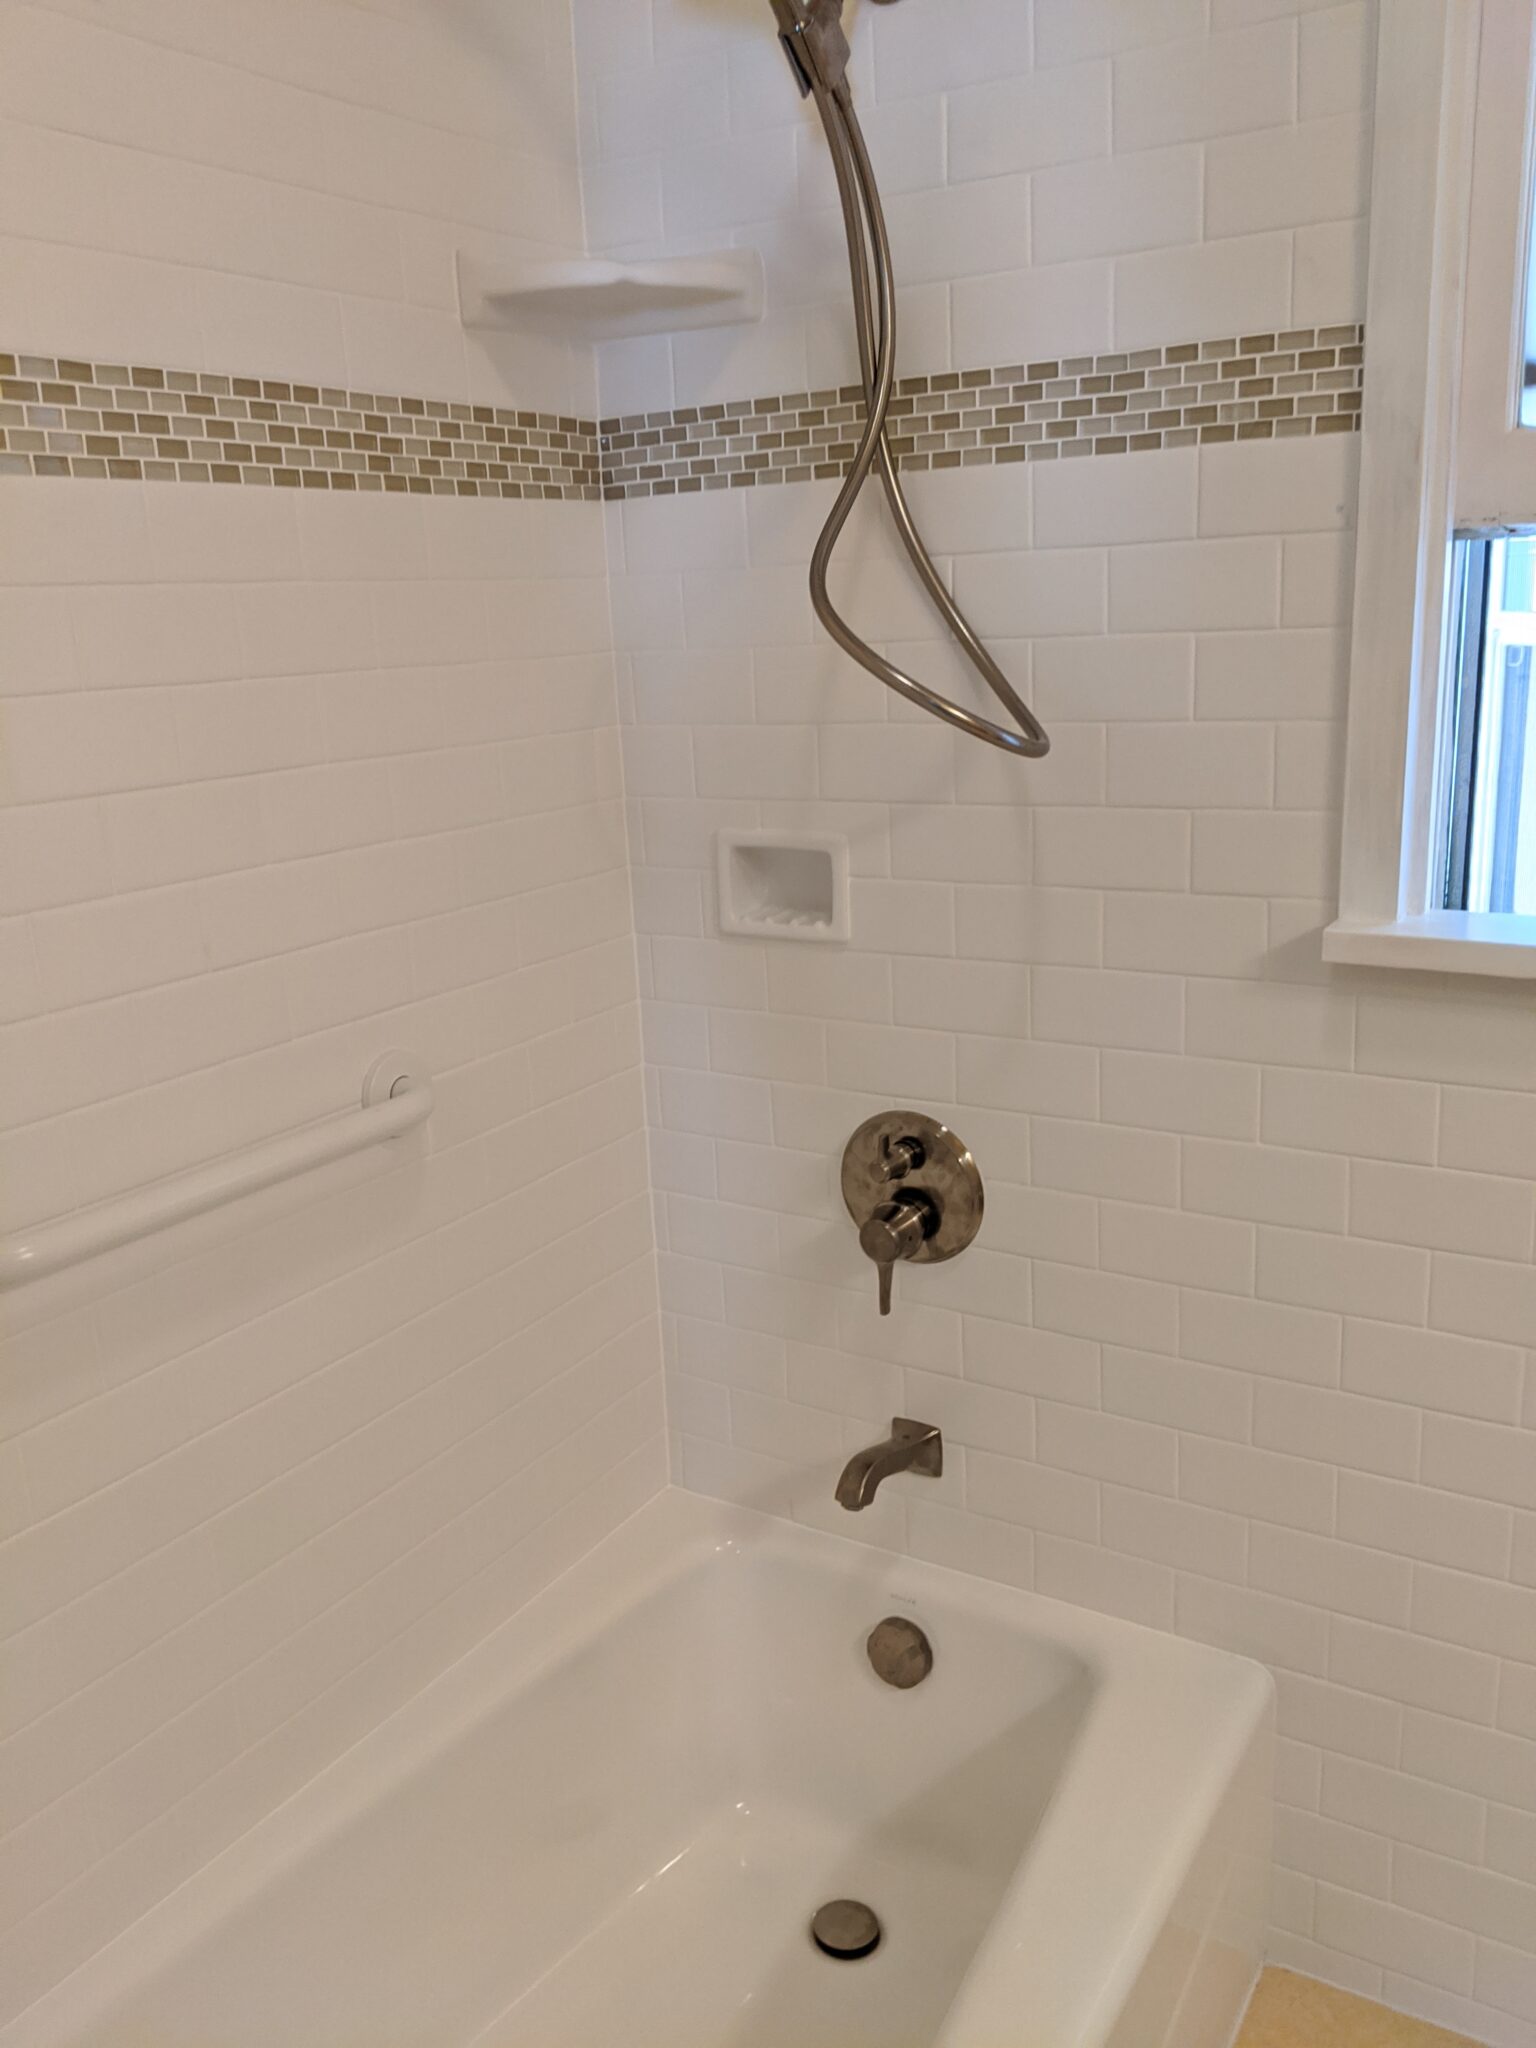 3x6 ceramic tile in a subway pattern with tile wainscot in North Park bathroom